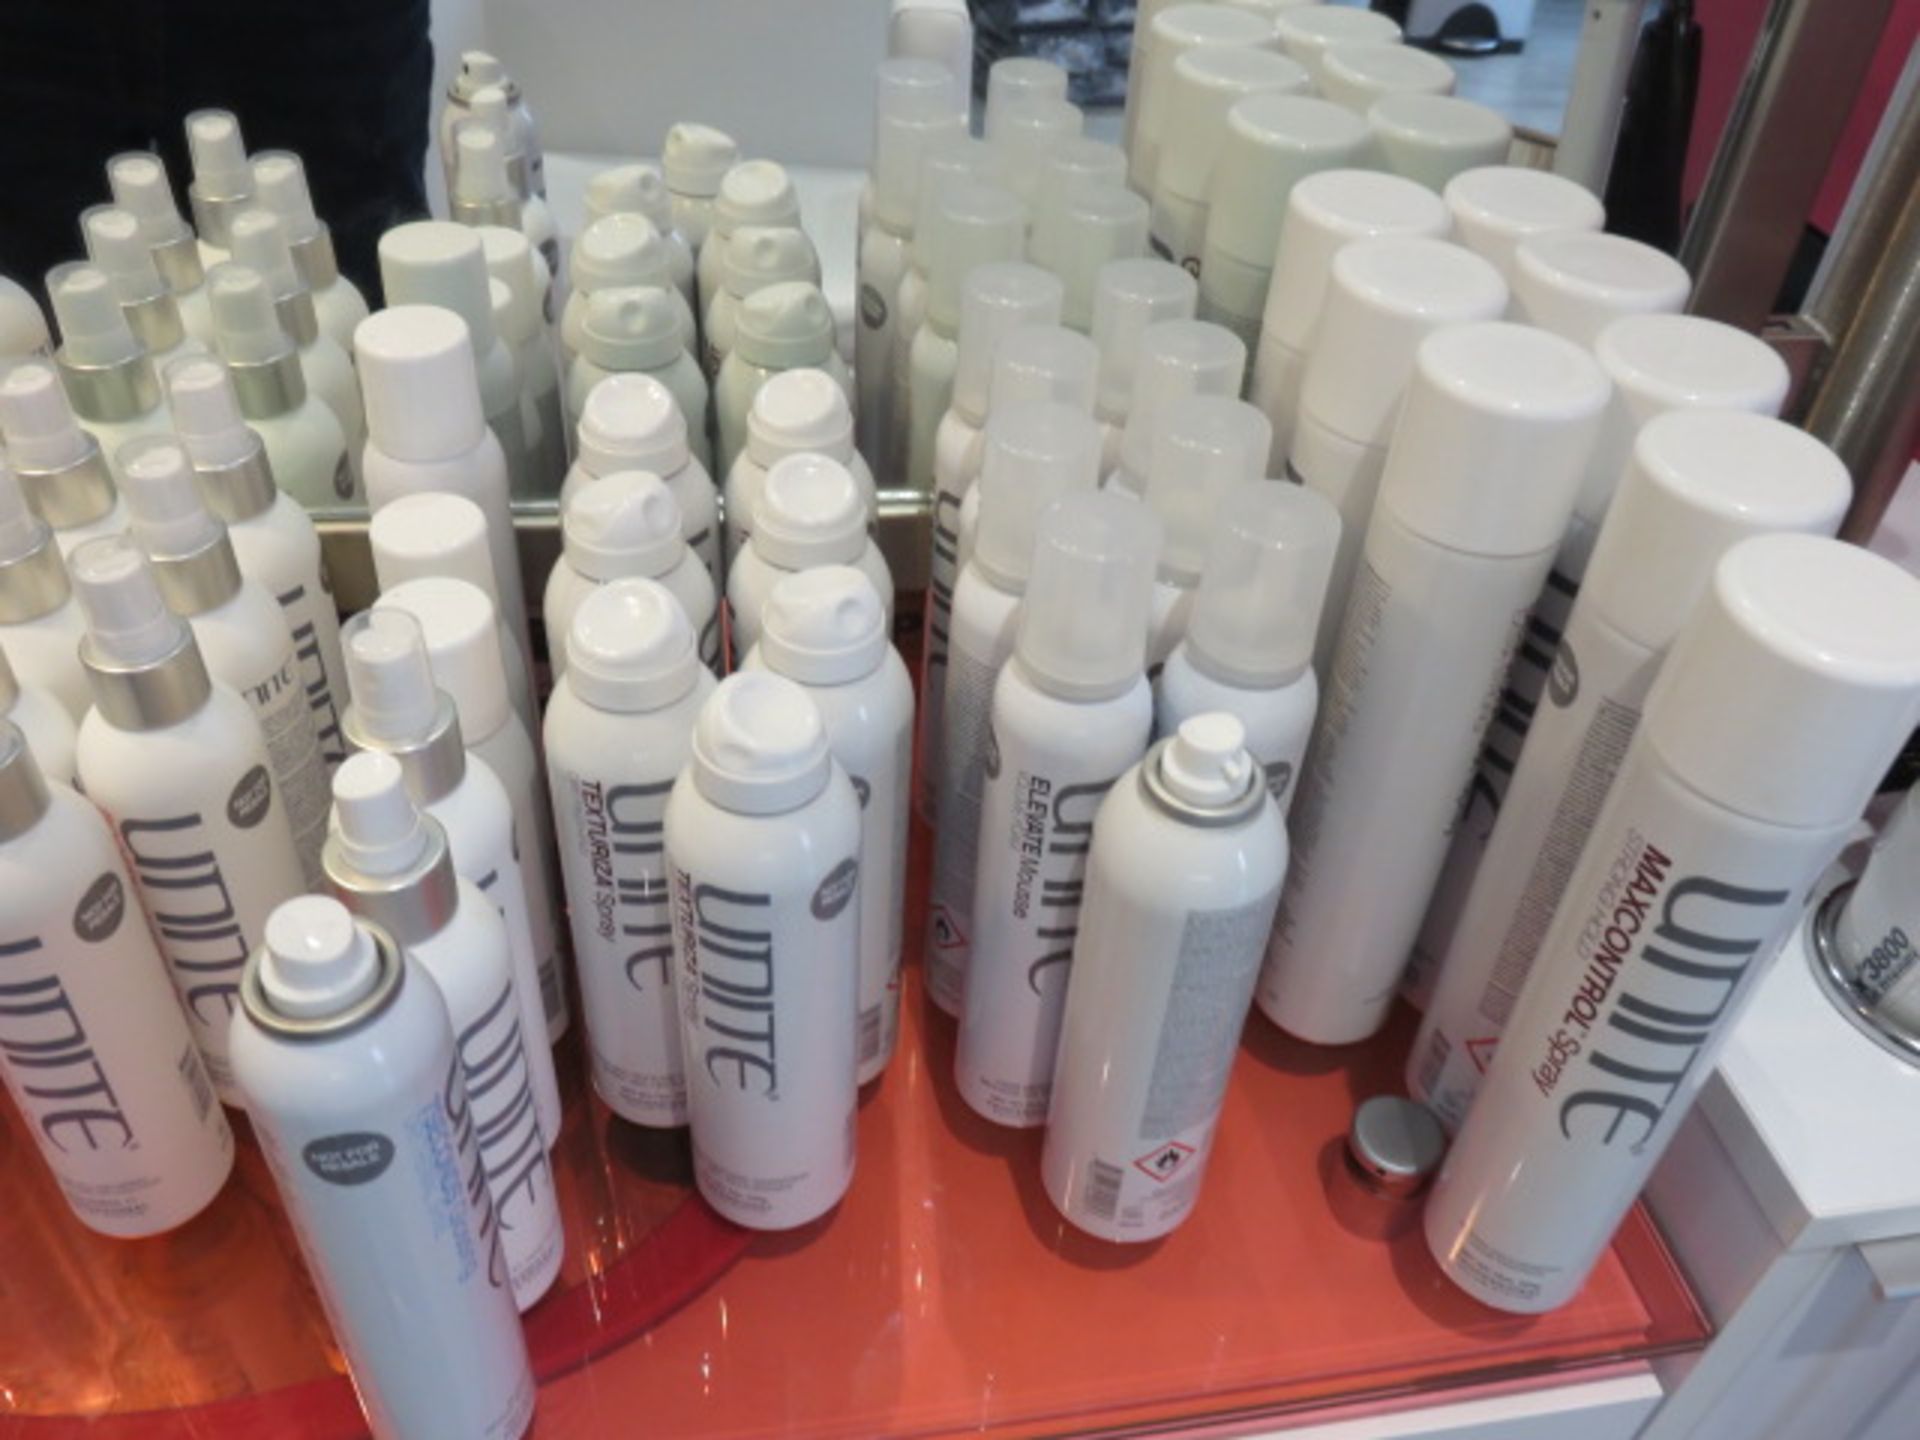 ASSORTED UNITE HAIR PRODUCTS, SPRAYS, CREAMS, OPEN BOTTLES - Image 4 of 4